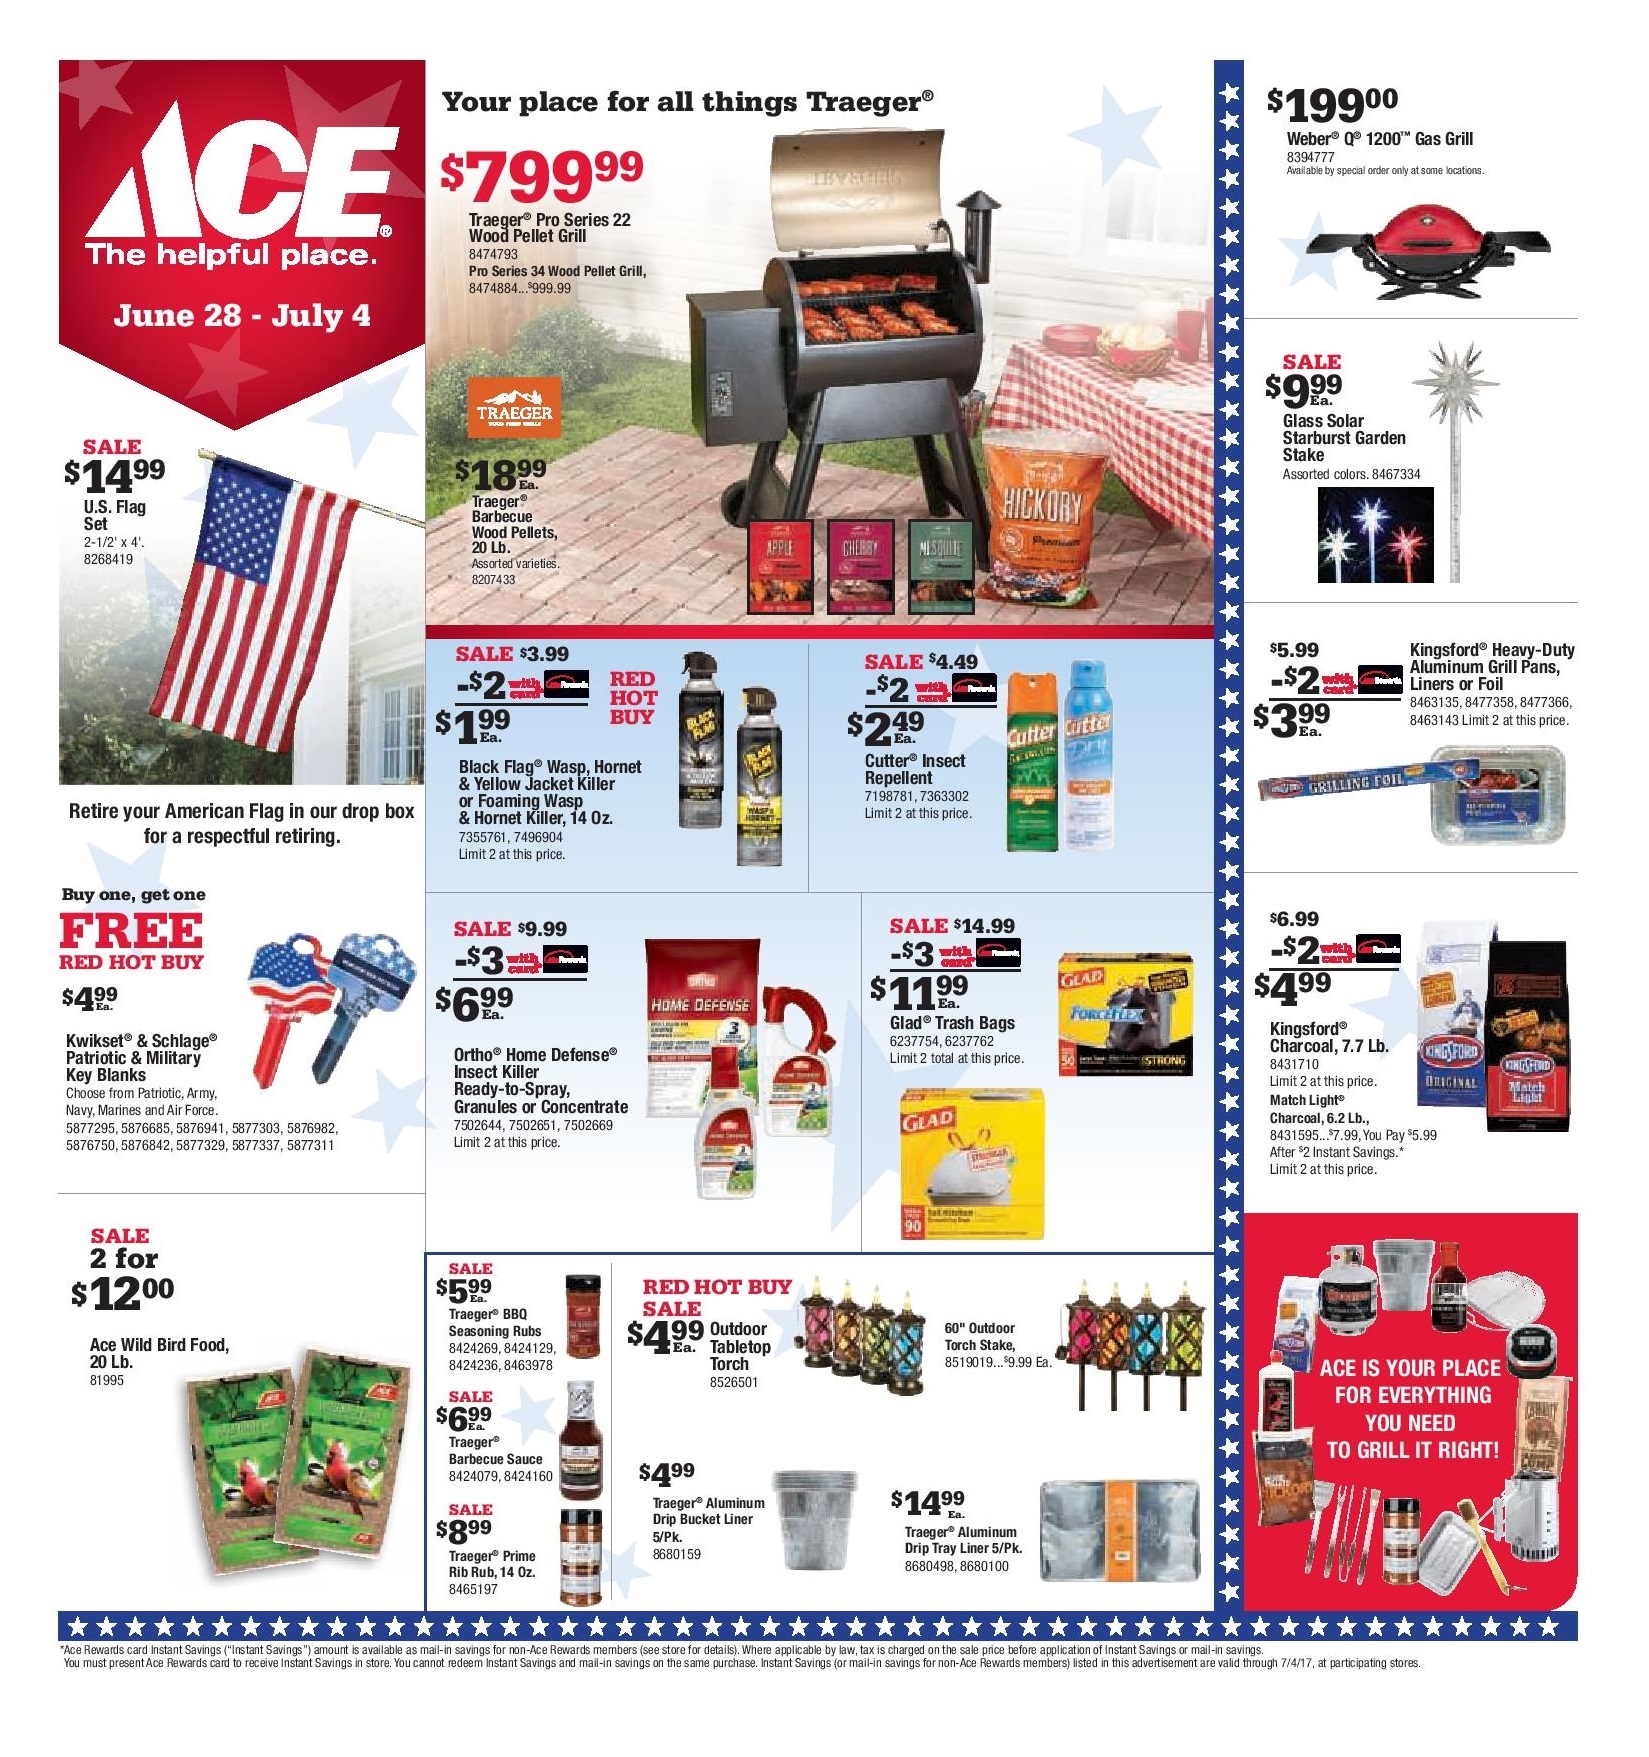 2017 4th of July Sale Ad - pg 1